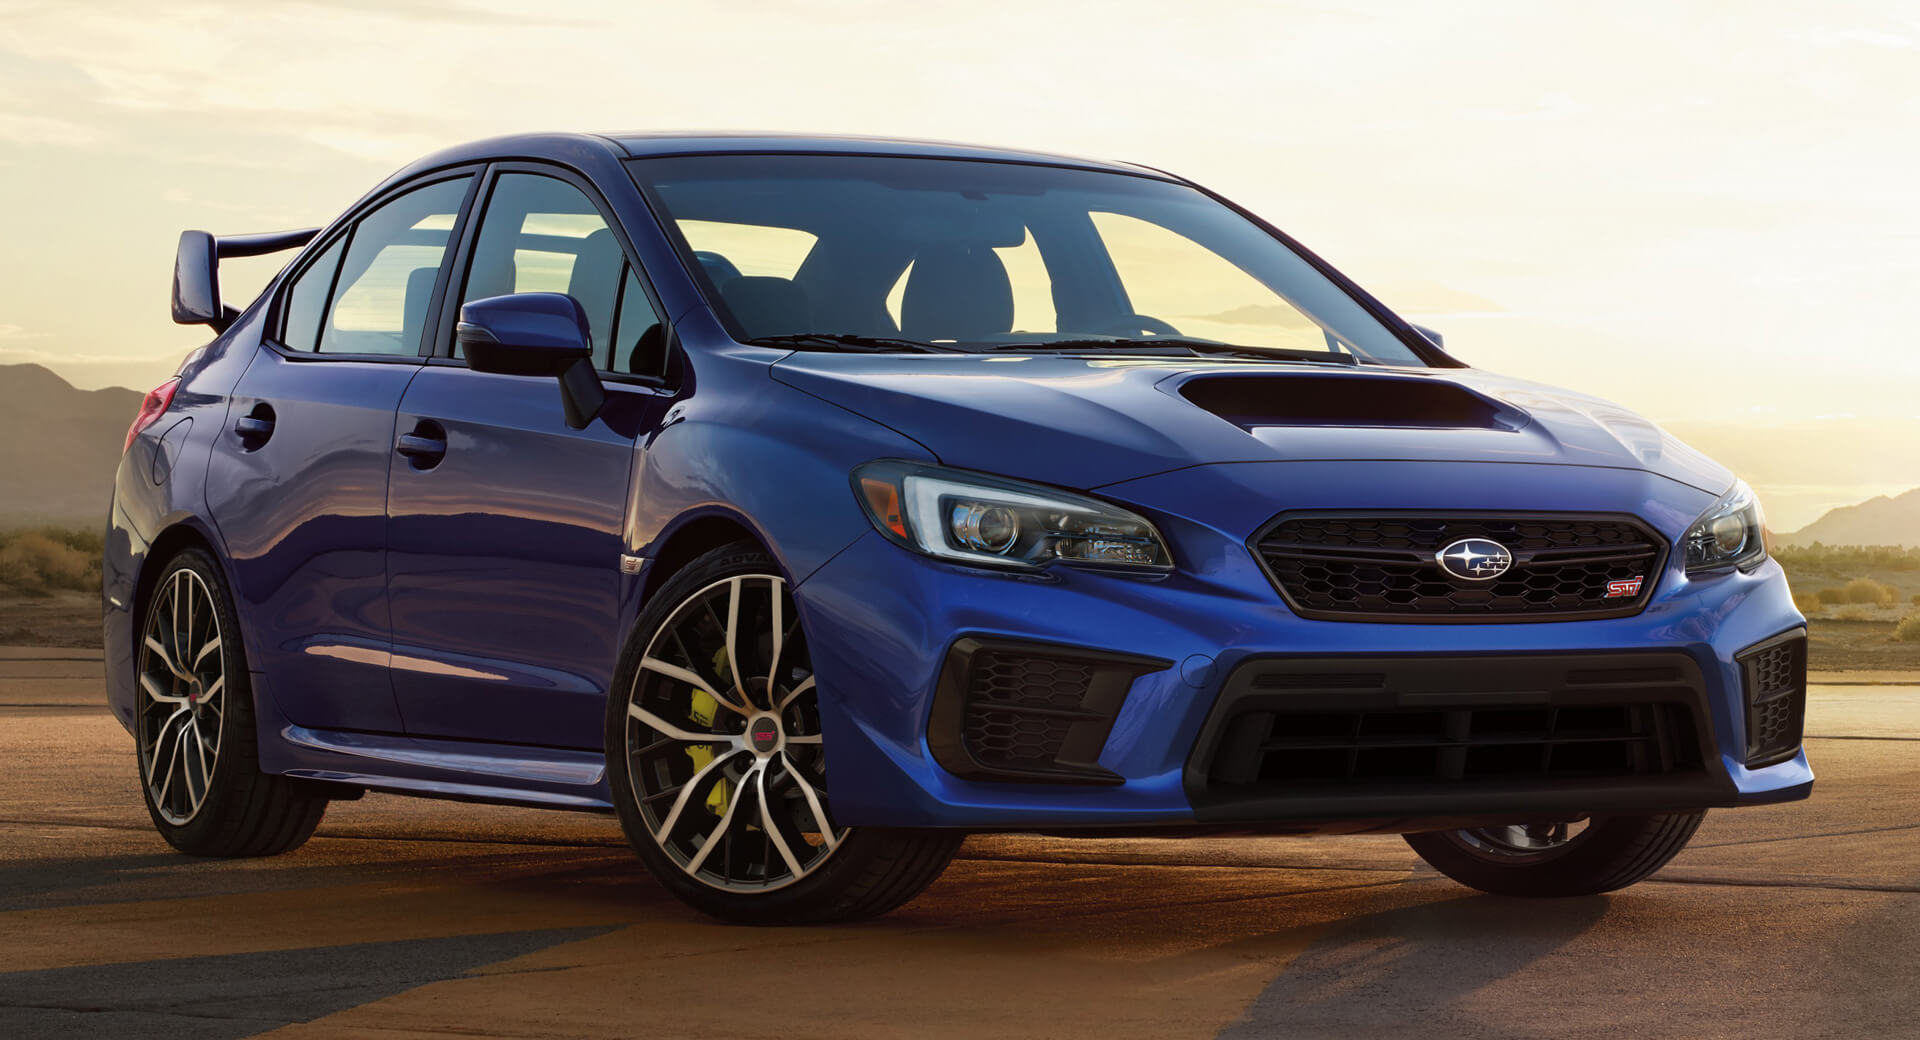 2021 Subaru WRX And WRX STI Pricing And Specs Announced | Carscoops